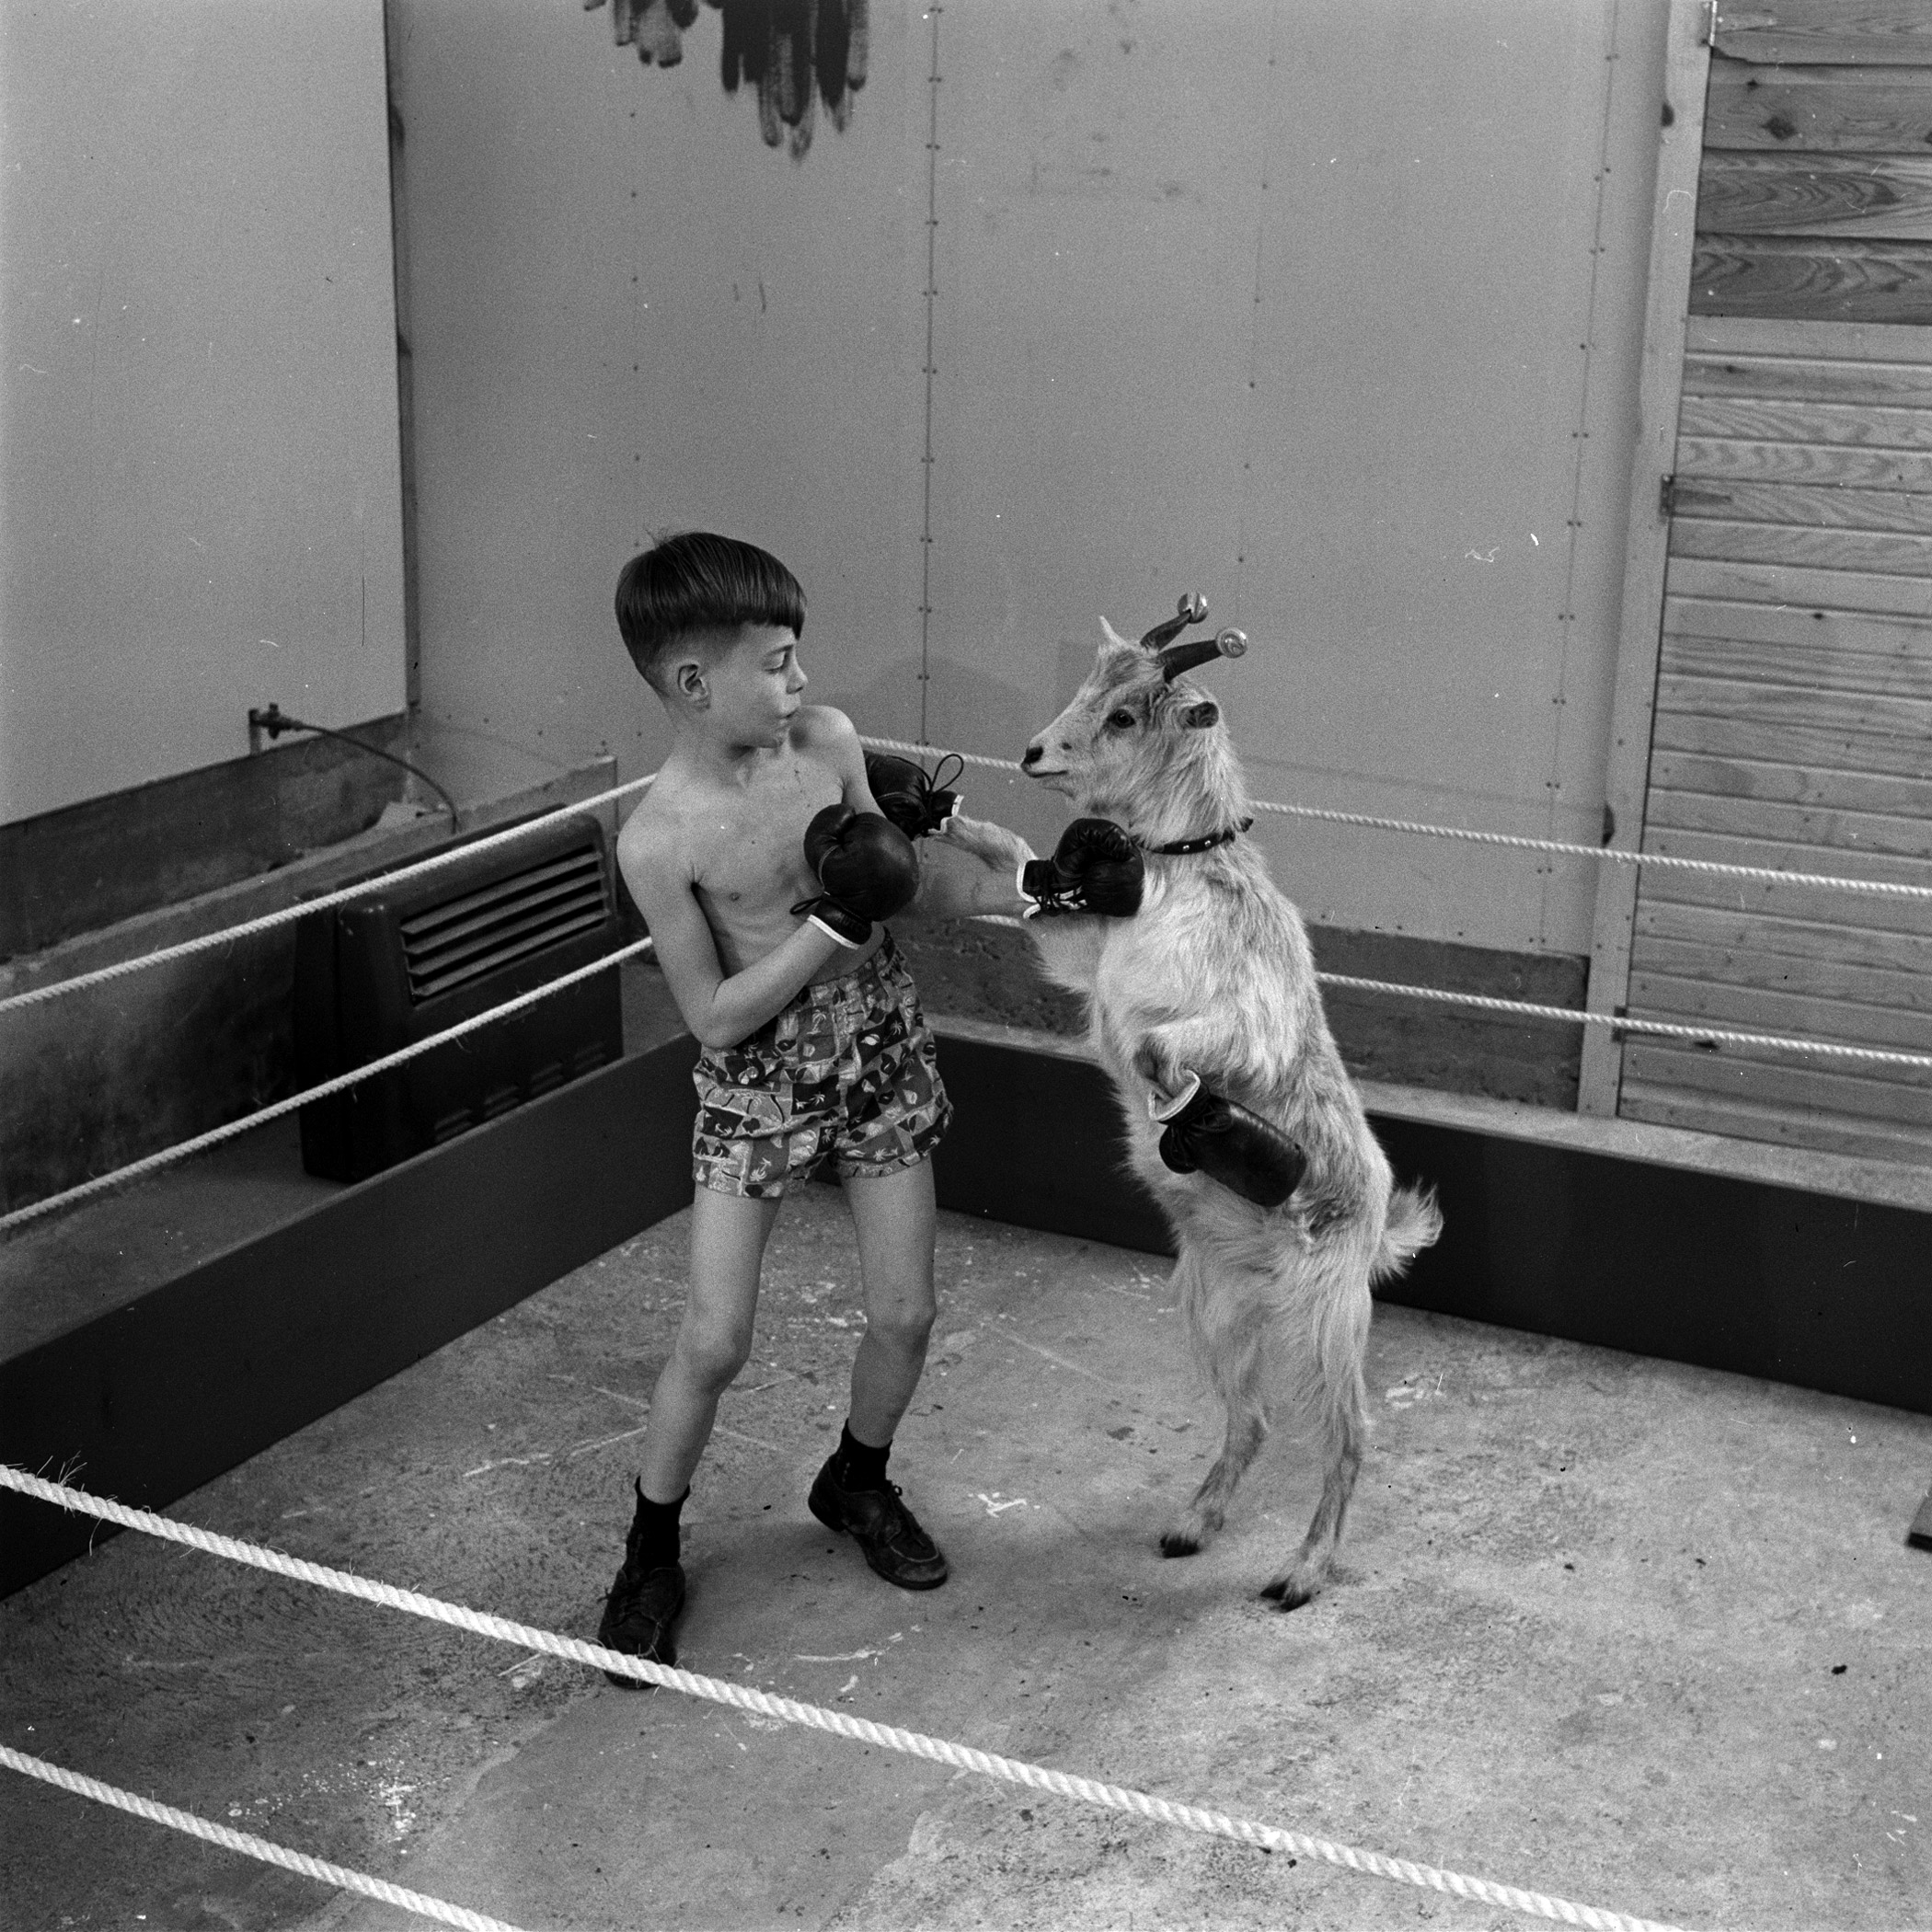 A goat trained to box with a young boy.